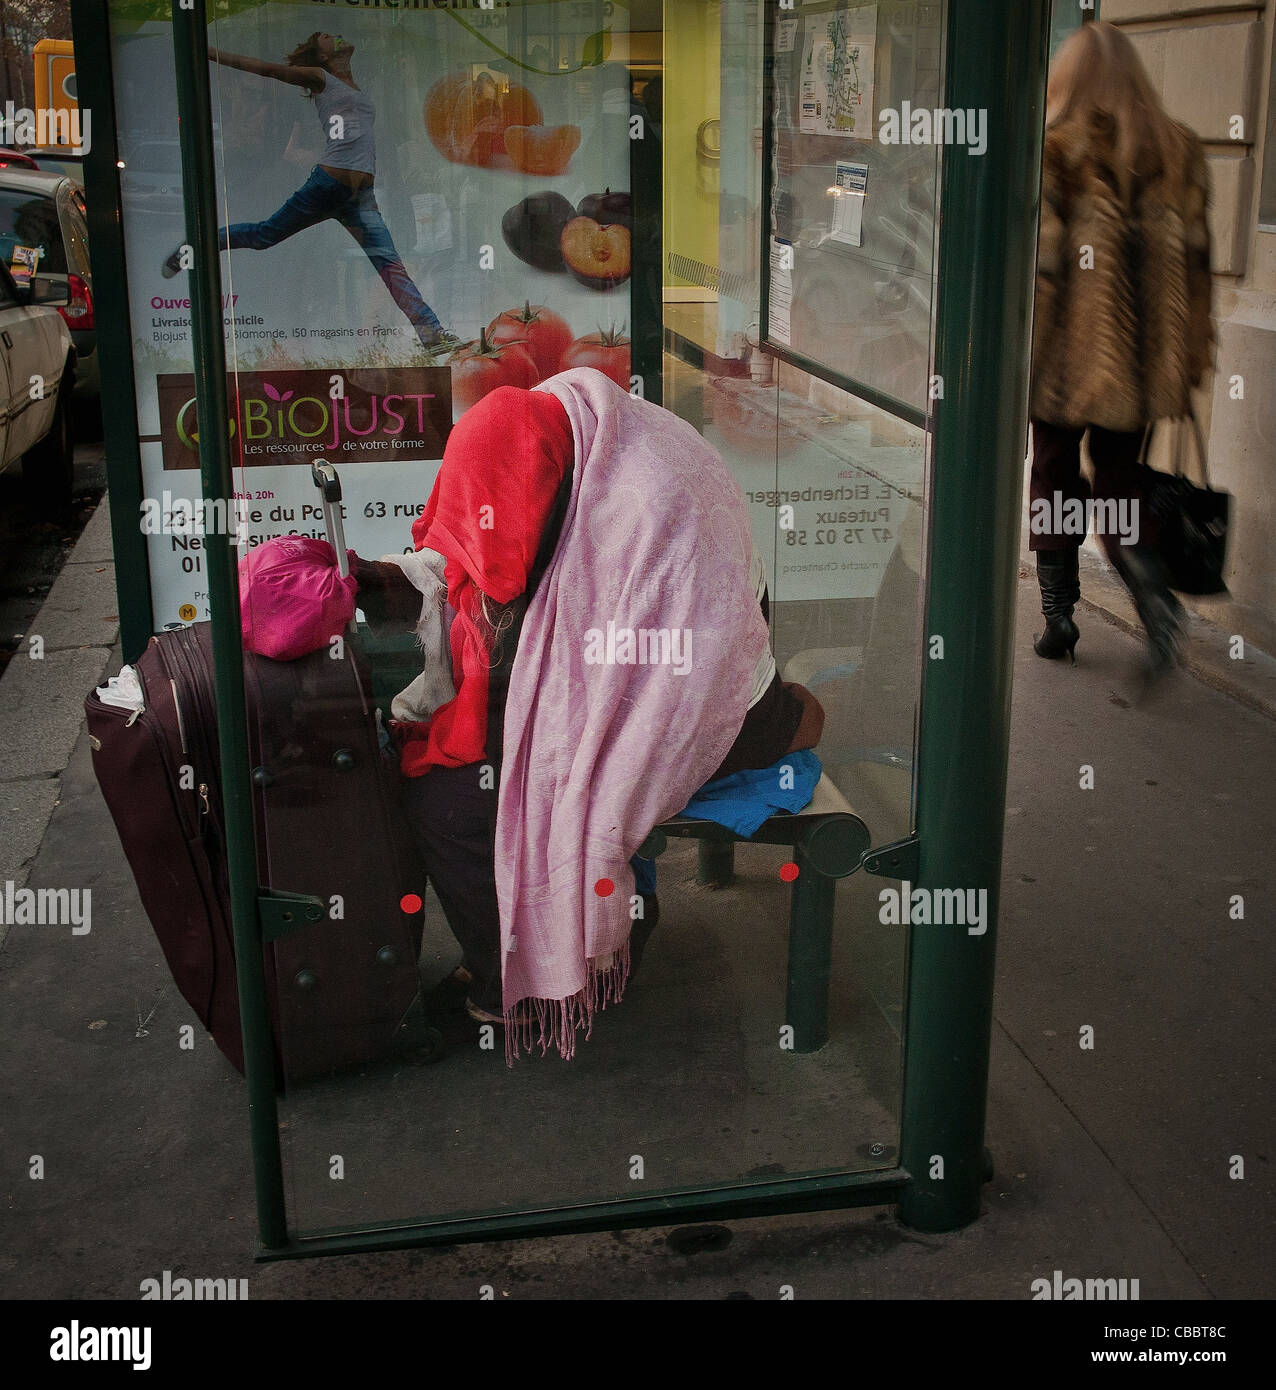 urban misery, Modern times. Bus shelter in Neuilly sur Seine, a sleeping homeless the day it's cold night and often fear Stock Photo